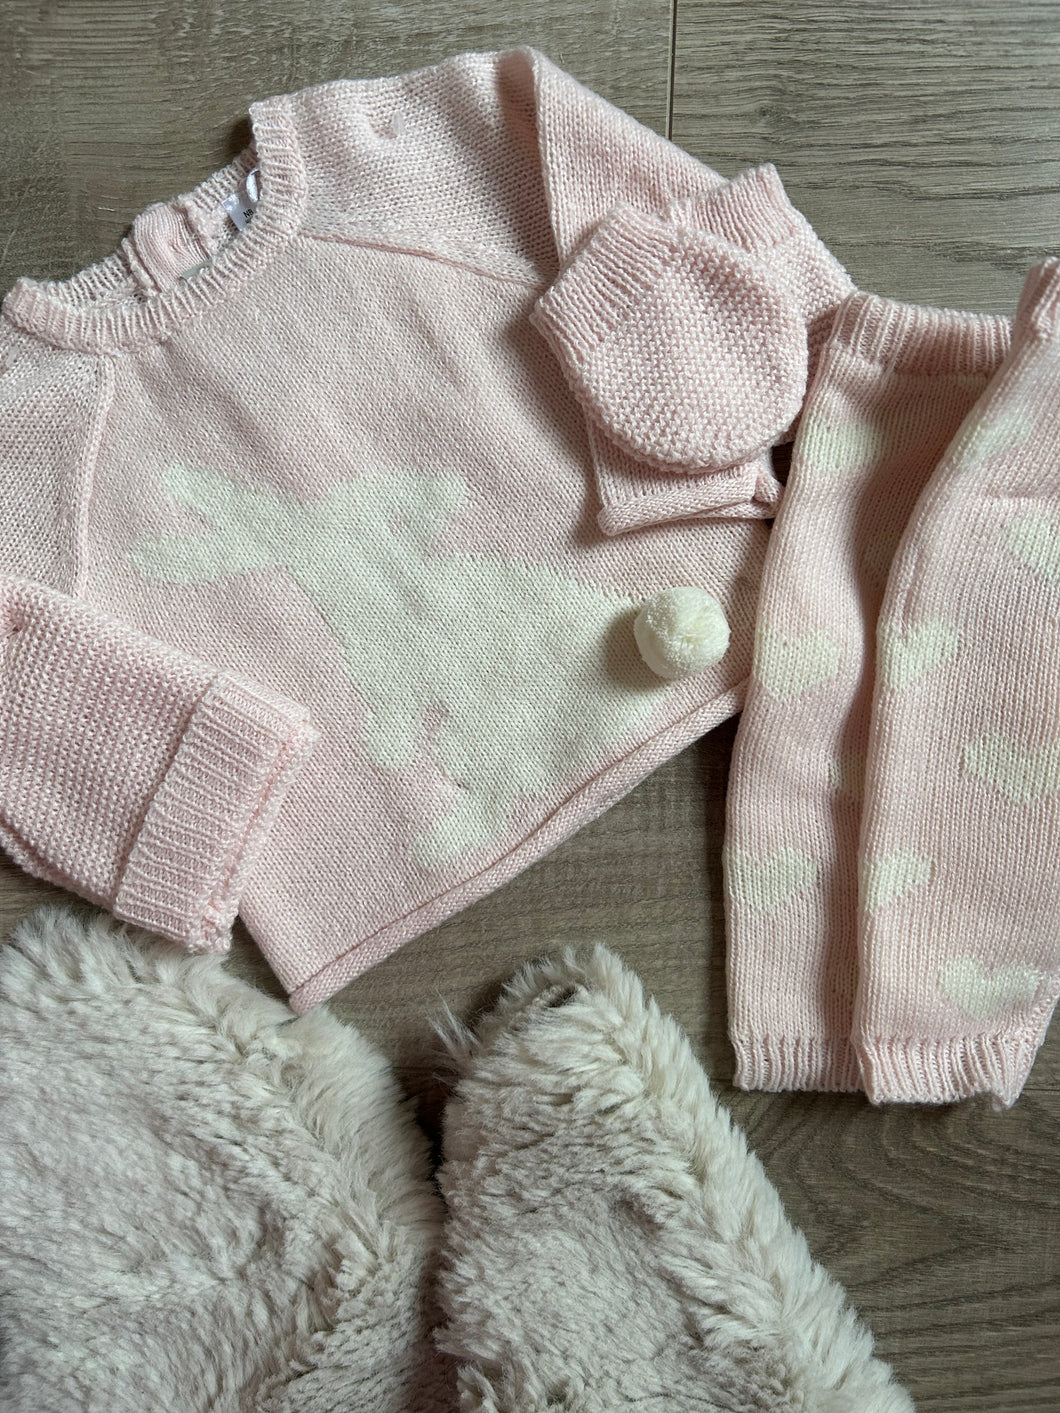 Baby girl bunny outfit